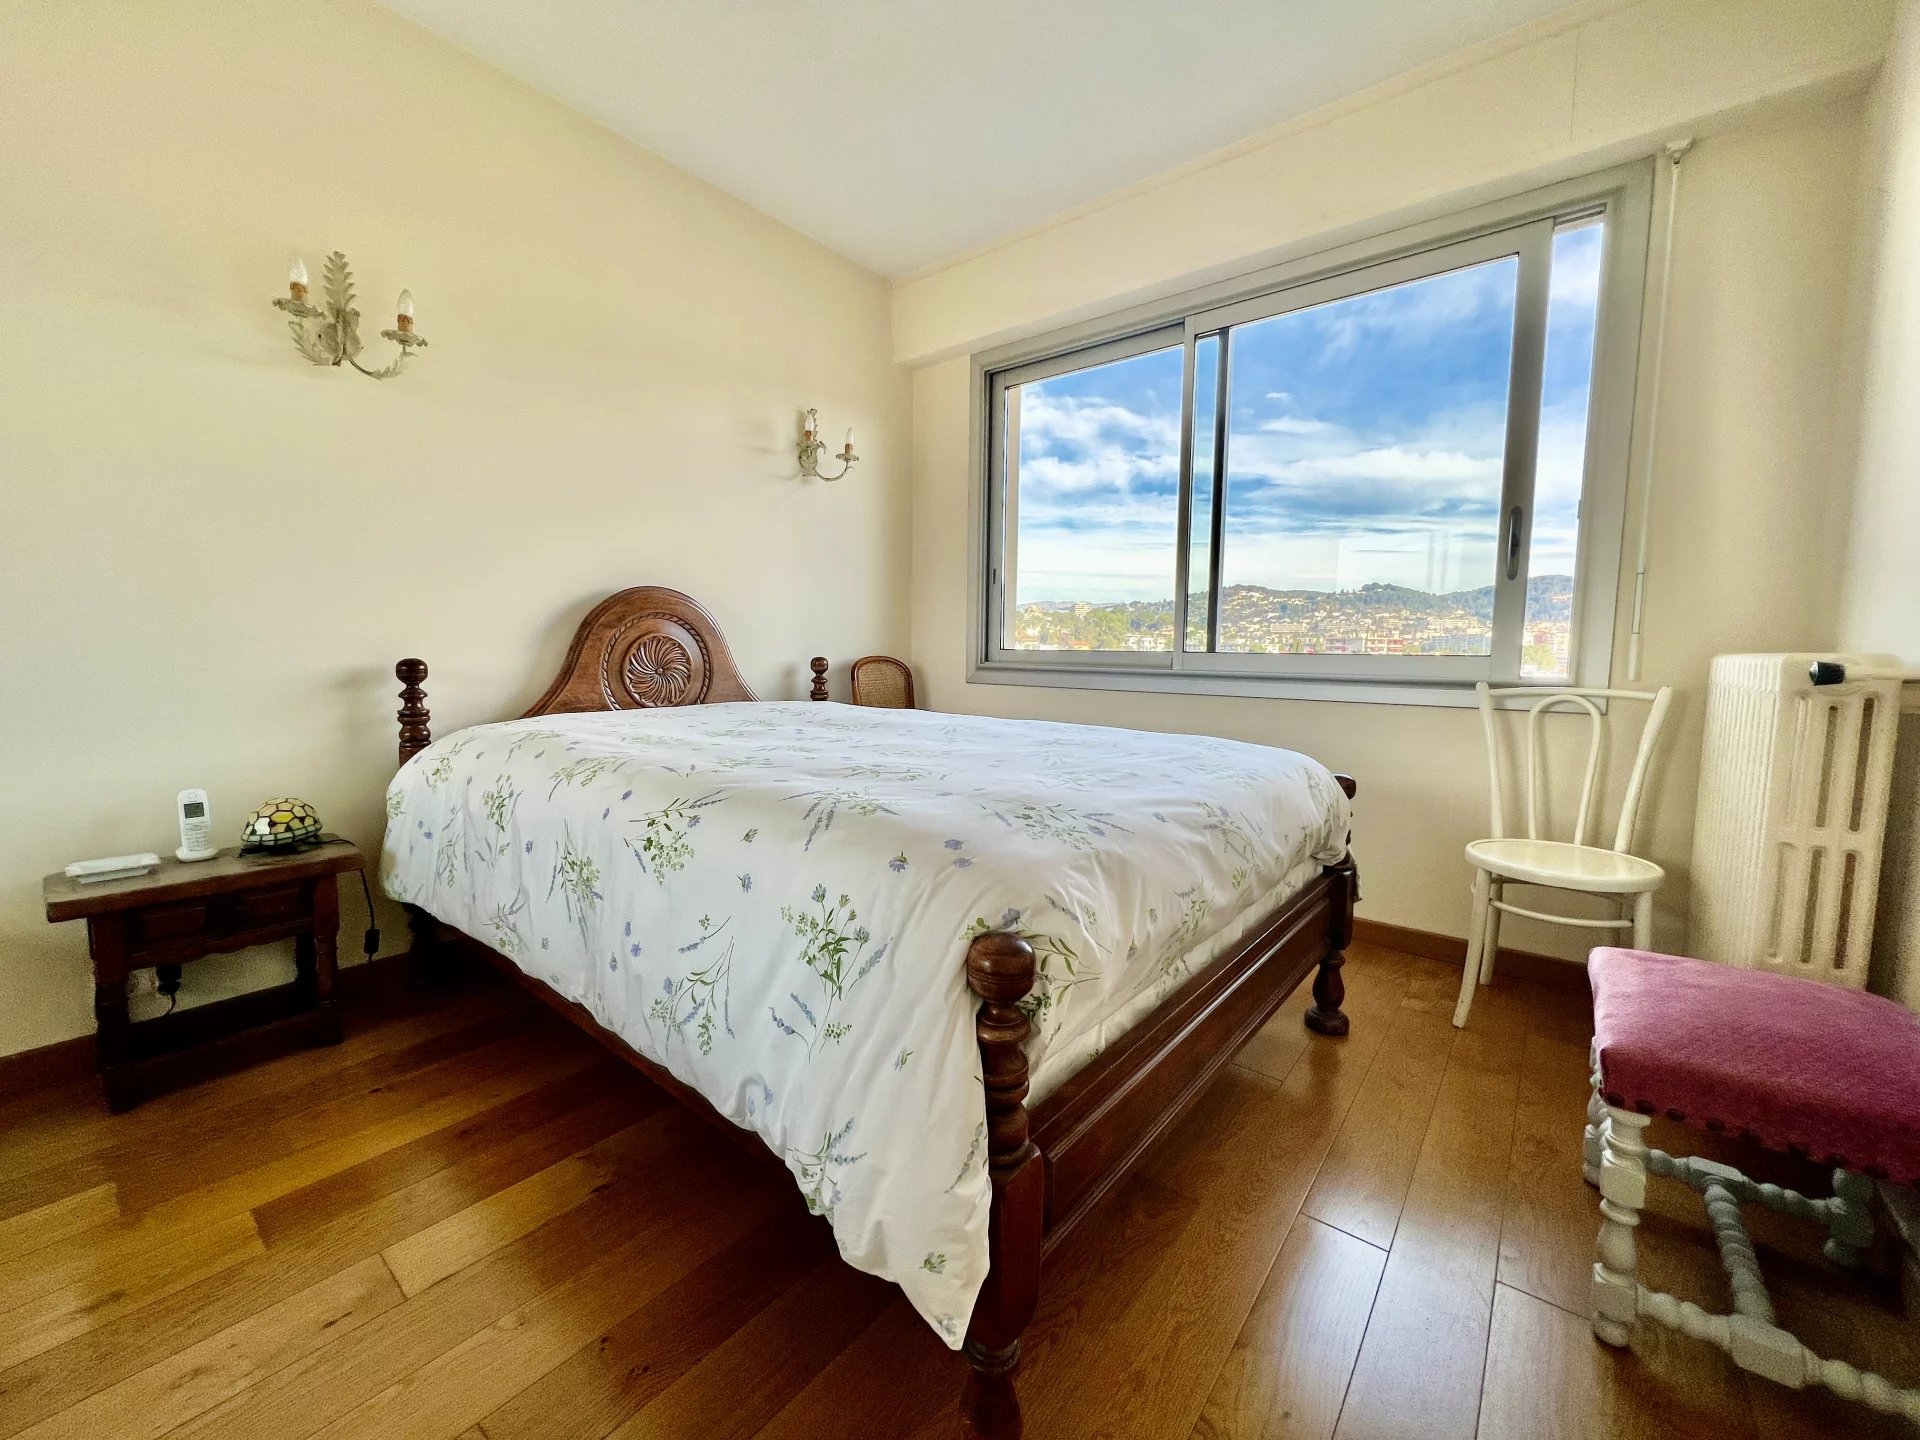 CANNET EUROPE: top floor, 3 rooms with beautiful terrace, parking and cellar